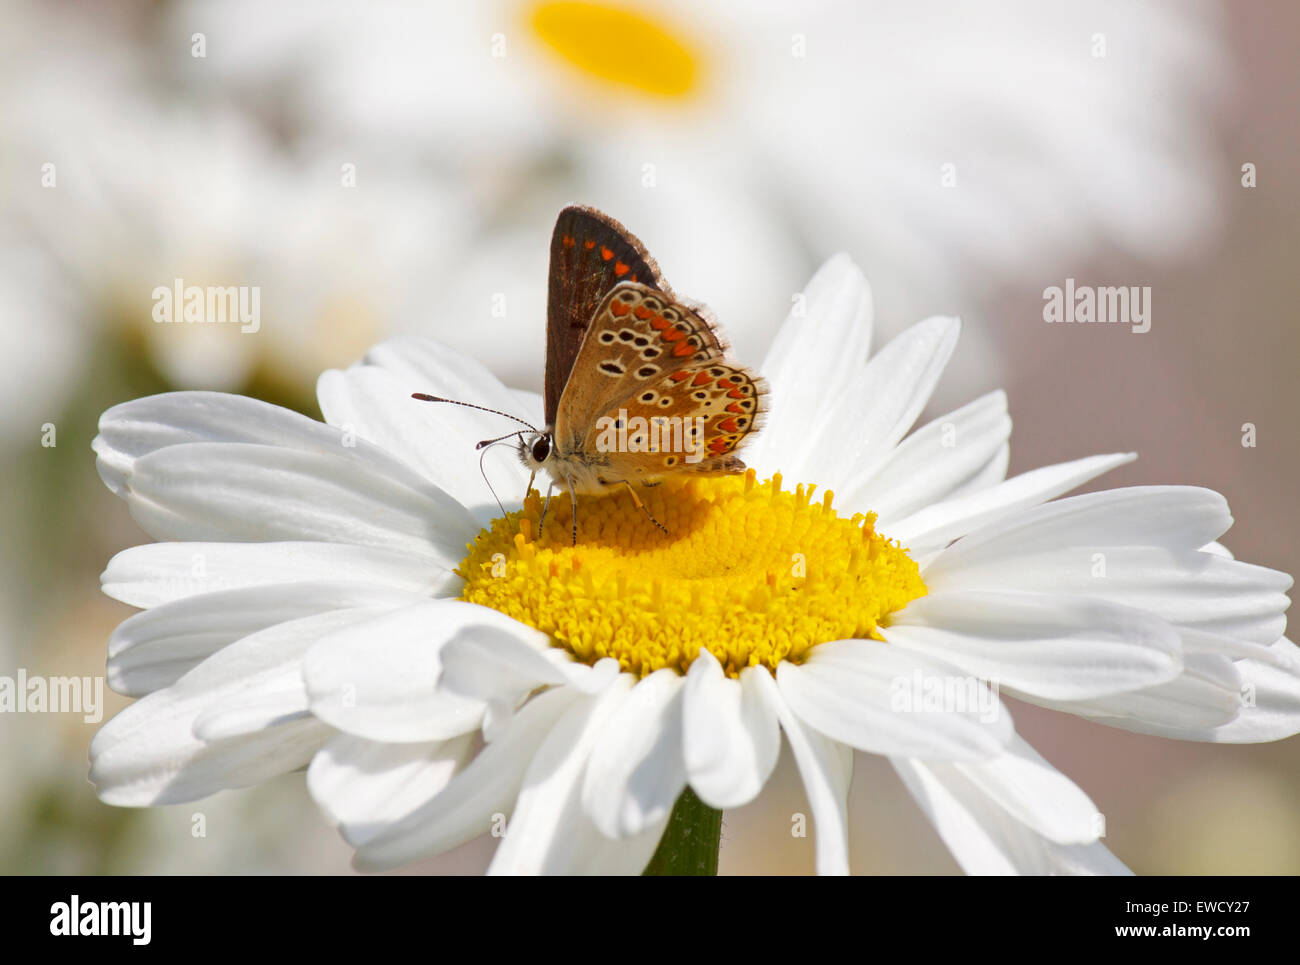 lycaenidae butterfly on daisy flower at summer Stock Photo